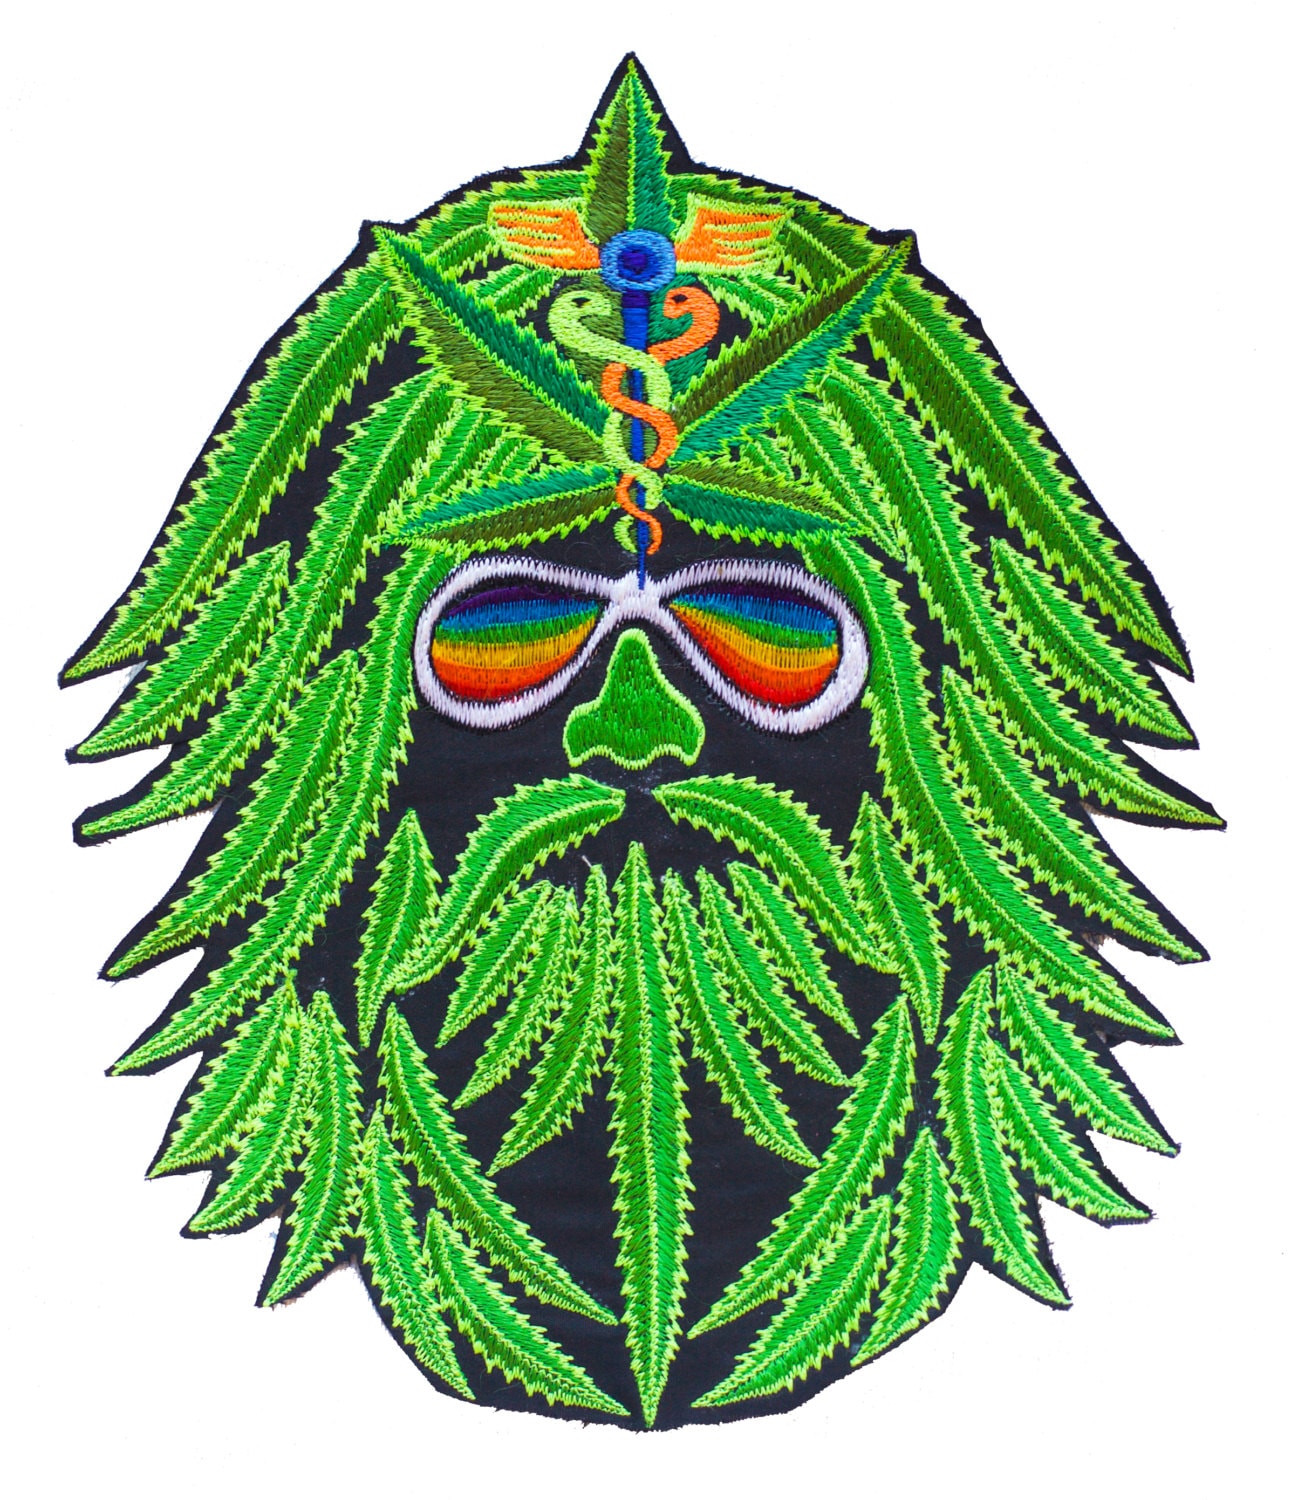 Medical Marihuana embroidery patch 7.5 inch Cannabis Hippie